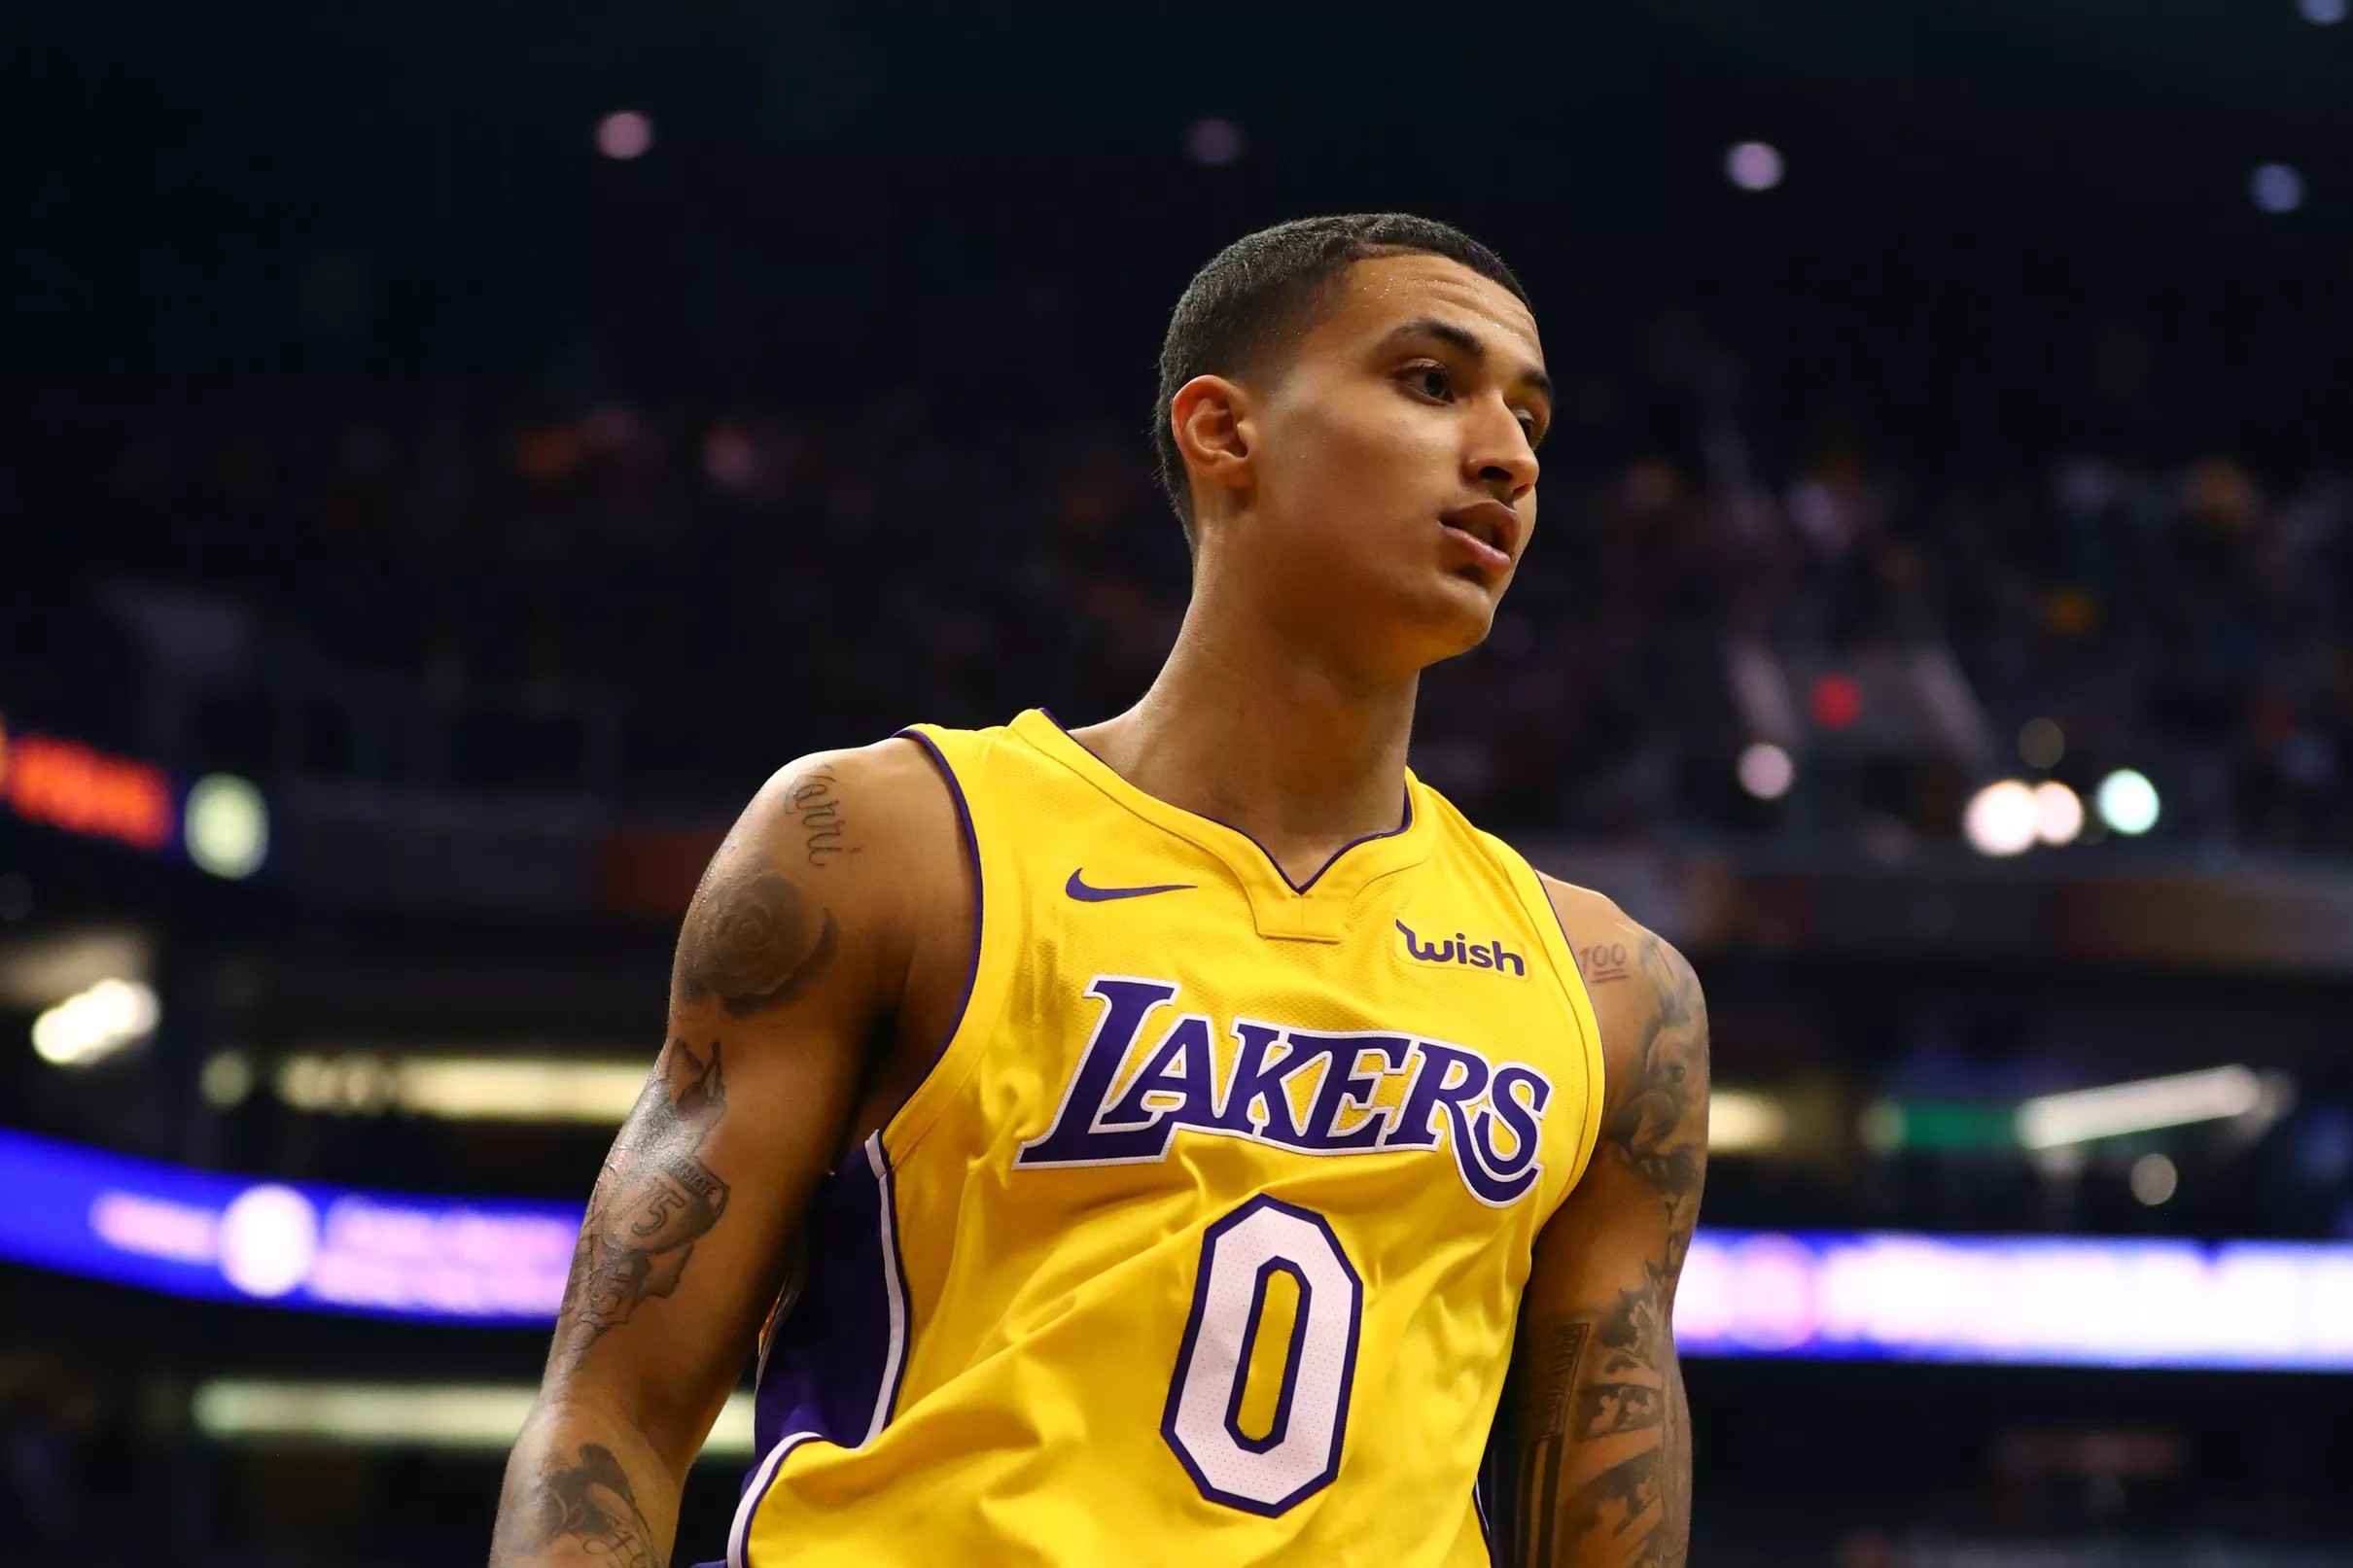 The legend of Kyle Kuzma only grows by the day. 